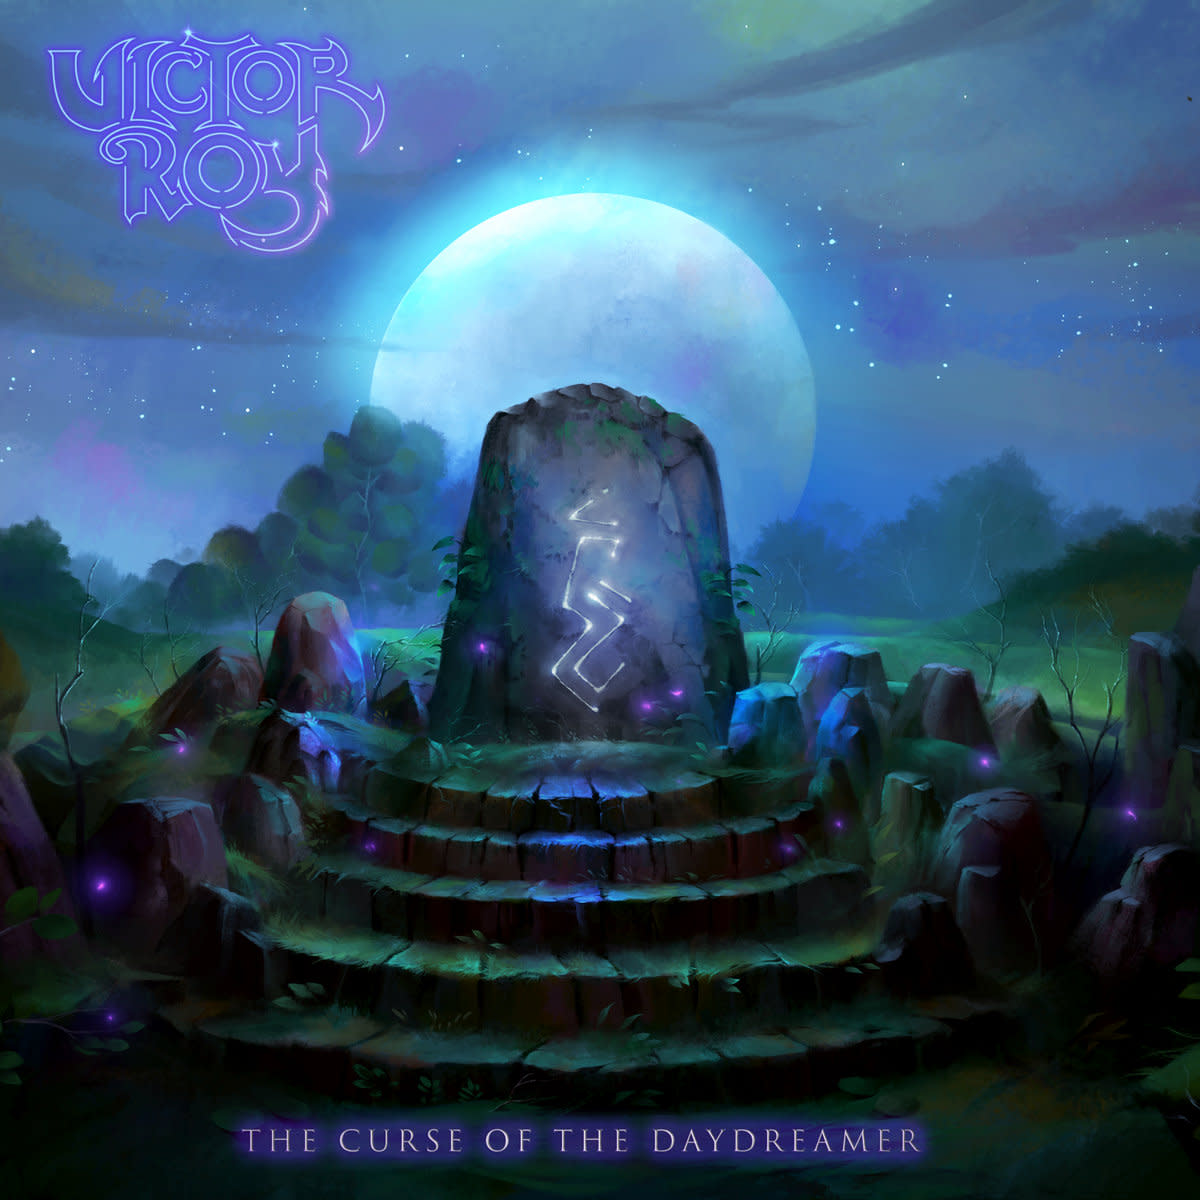 synth-album-review-the-curse-of-the-daydreamer-by-victor-roy